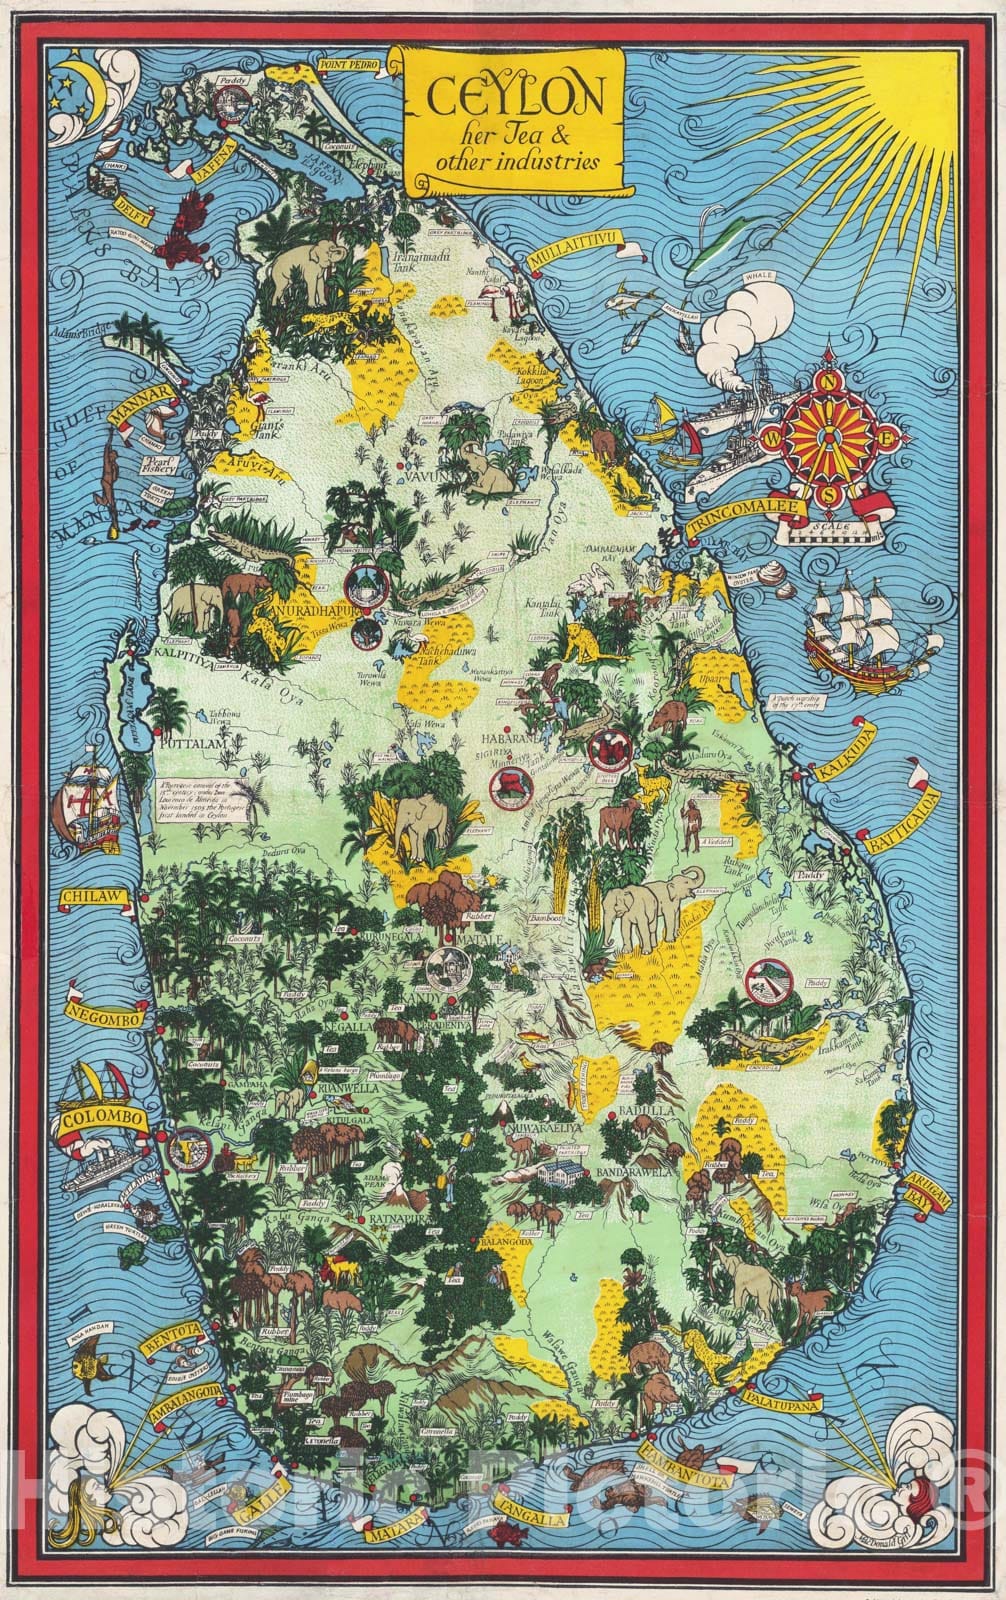 Historic Map - 1933 Pictorial Map - Ceylon, her Tea and Other Industries. - Vintage Wall Art